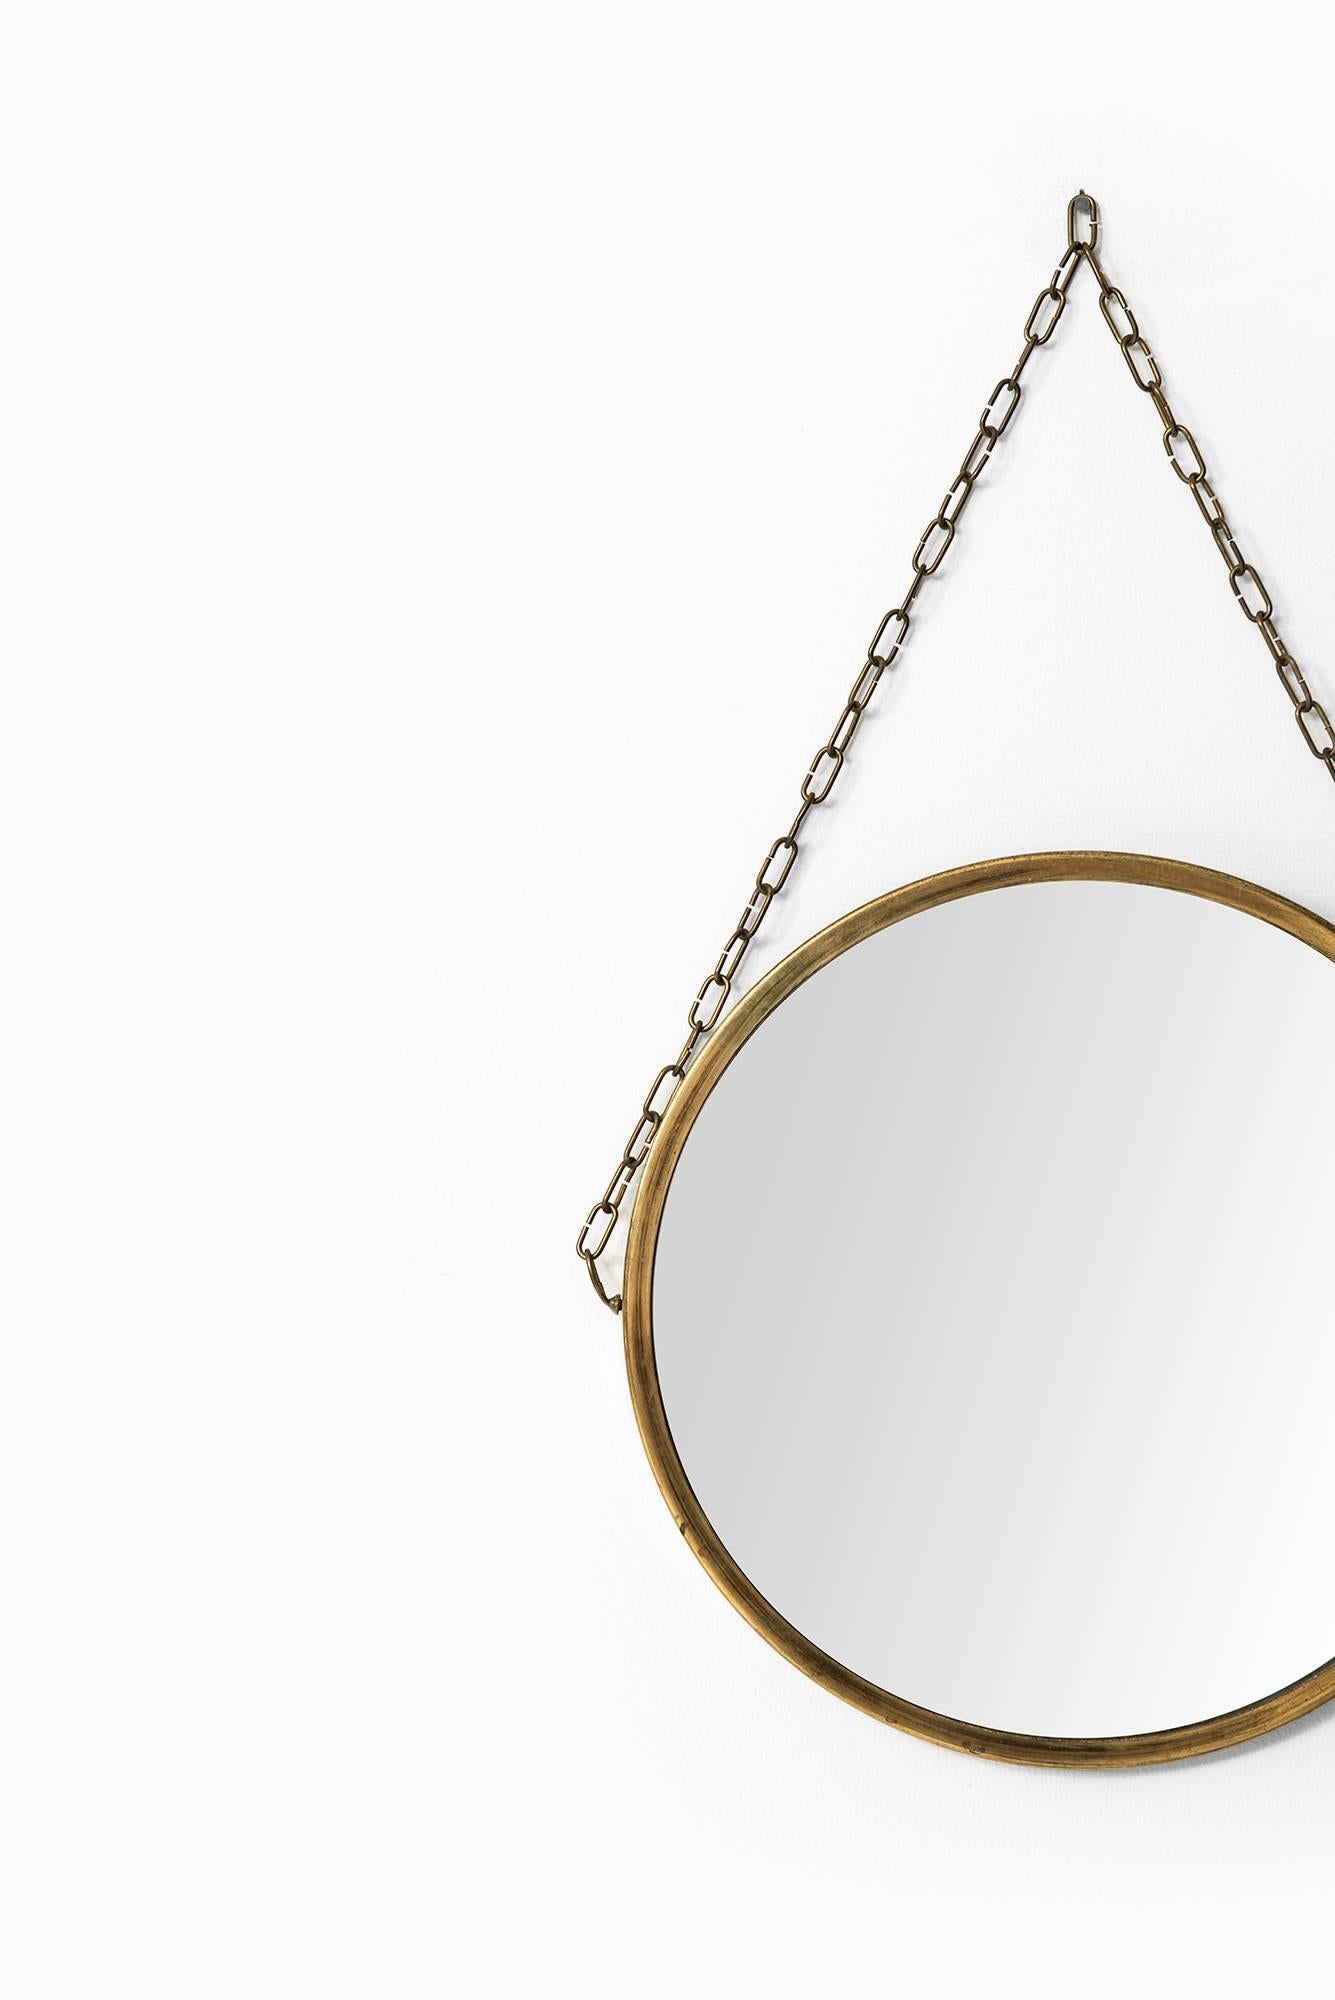 A pair of round mirrors in brass produced in Sweden.